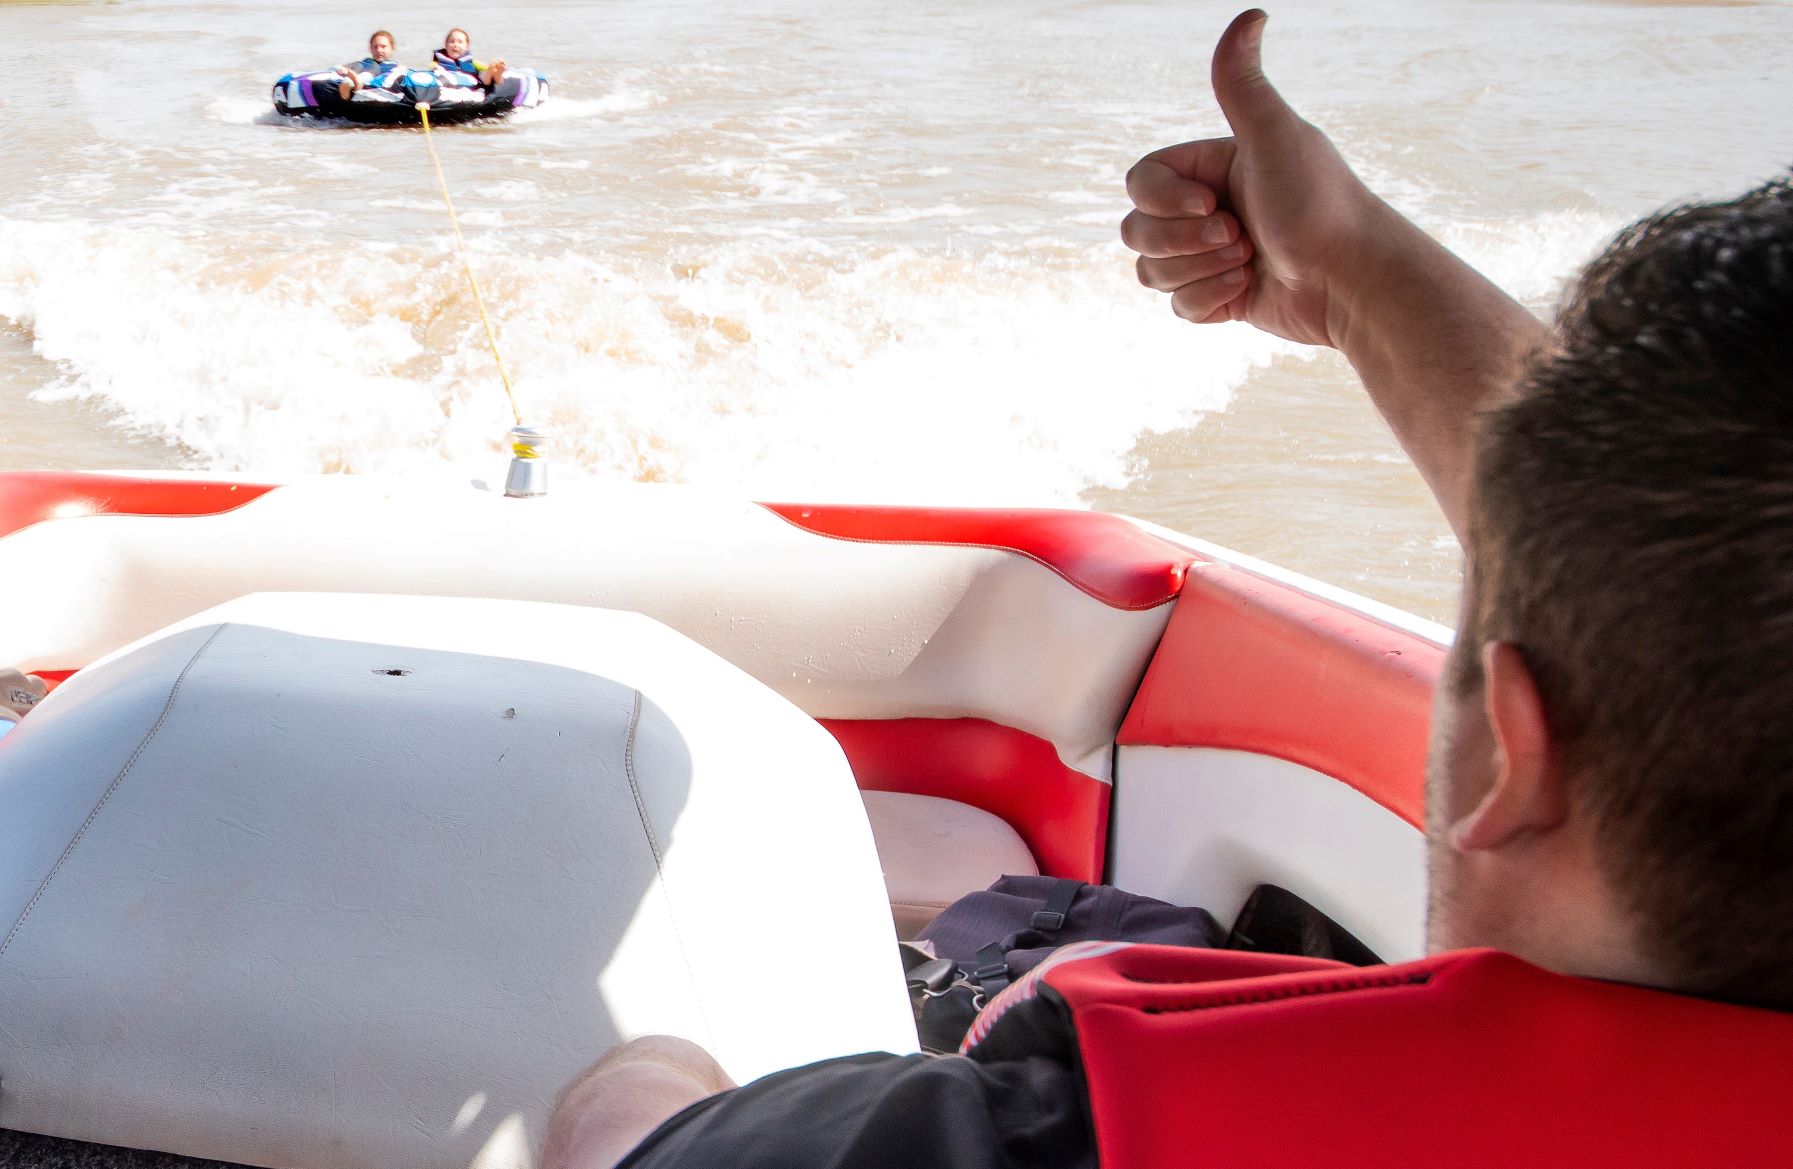 Man in boat giving thumbs up to children being towed on a tube